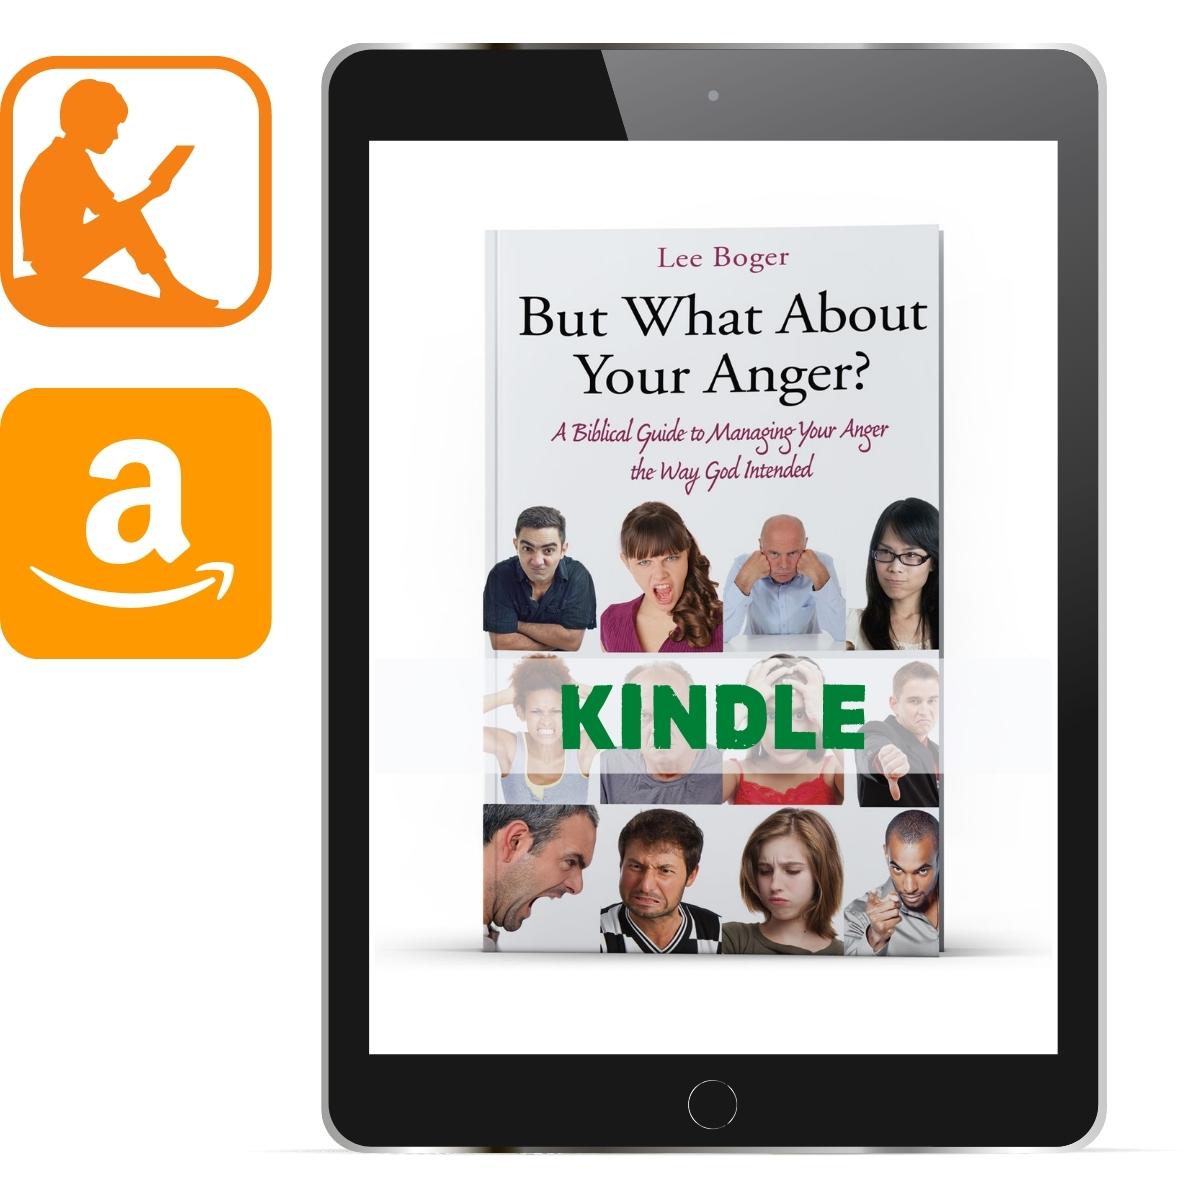 But What About Your Anger? A Biblical Guide to Managing Your Anger the Way God Intended (Kindle) - Illumination Publishers